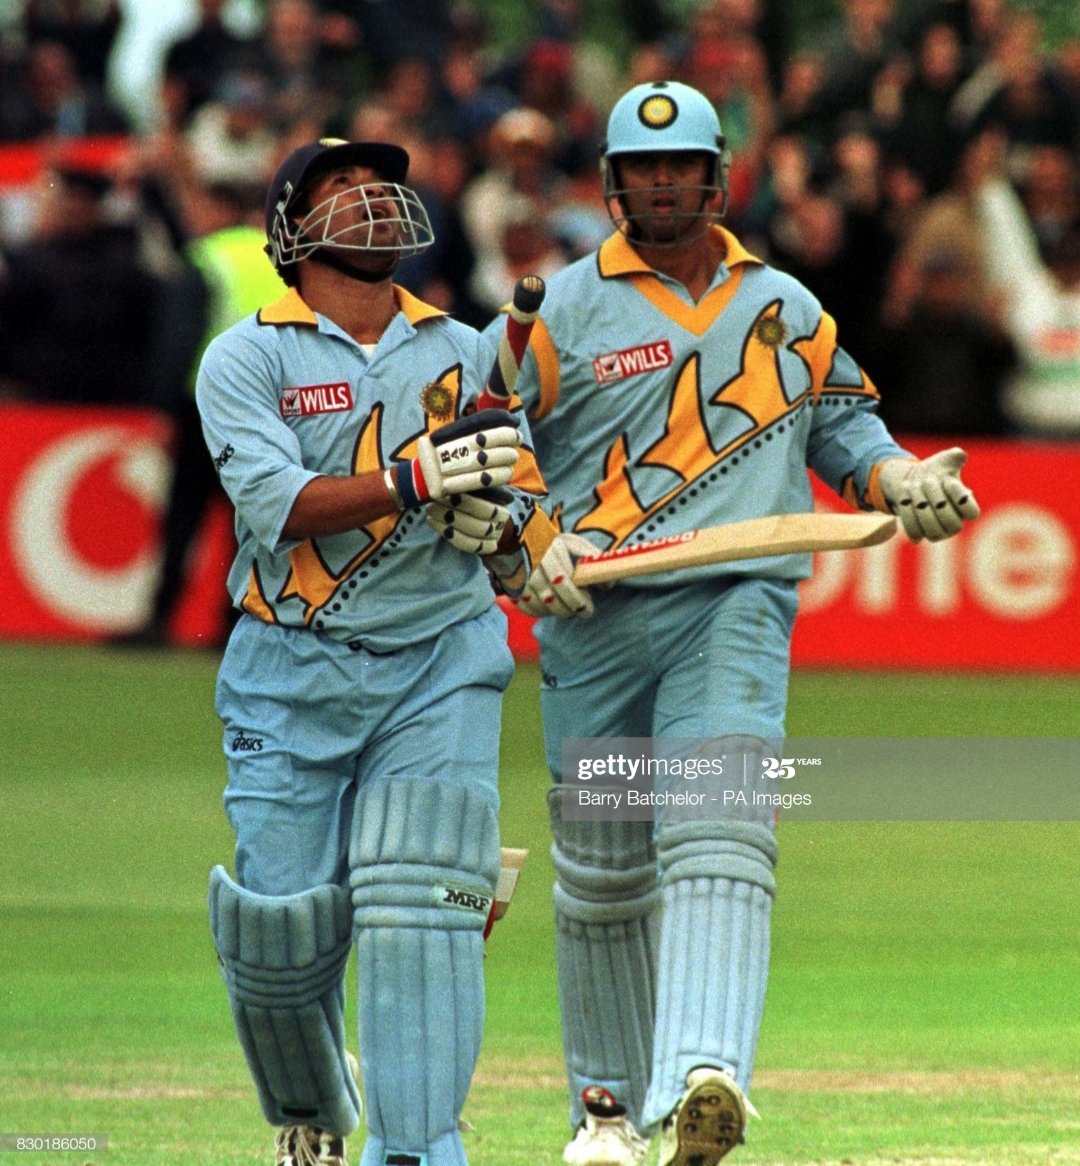 There's always anxiety prior to a Cricket match, but this particular WC match had us emotionally drained with India's beloved son returning to Cricket, post the sad demise of his beloved father #OnThisDay in Bristol '99,  @sachin_rt was "blessed by his father" from the heaven